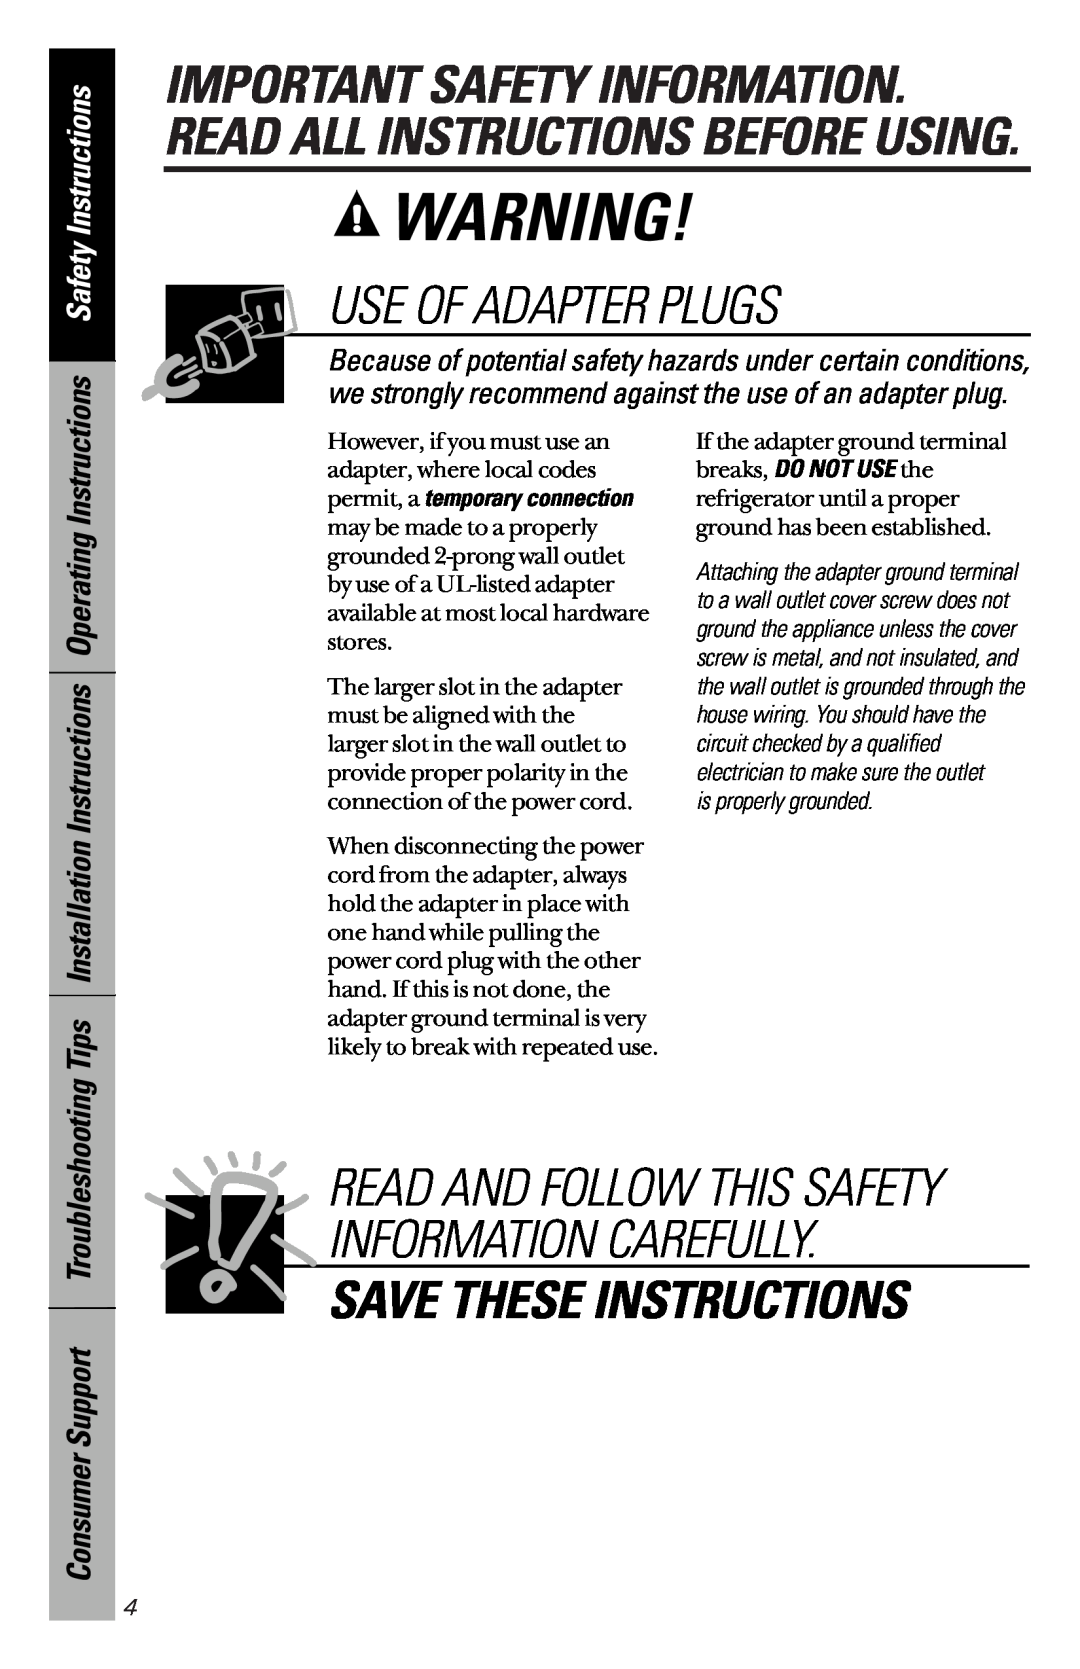 GE 162D9639P003 Use Of Adapter Plugs, Consumer Support Troubleshooting, Save These Instructions, Safety Instructions 